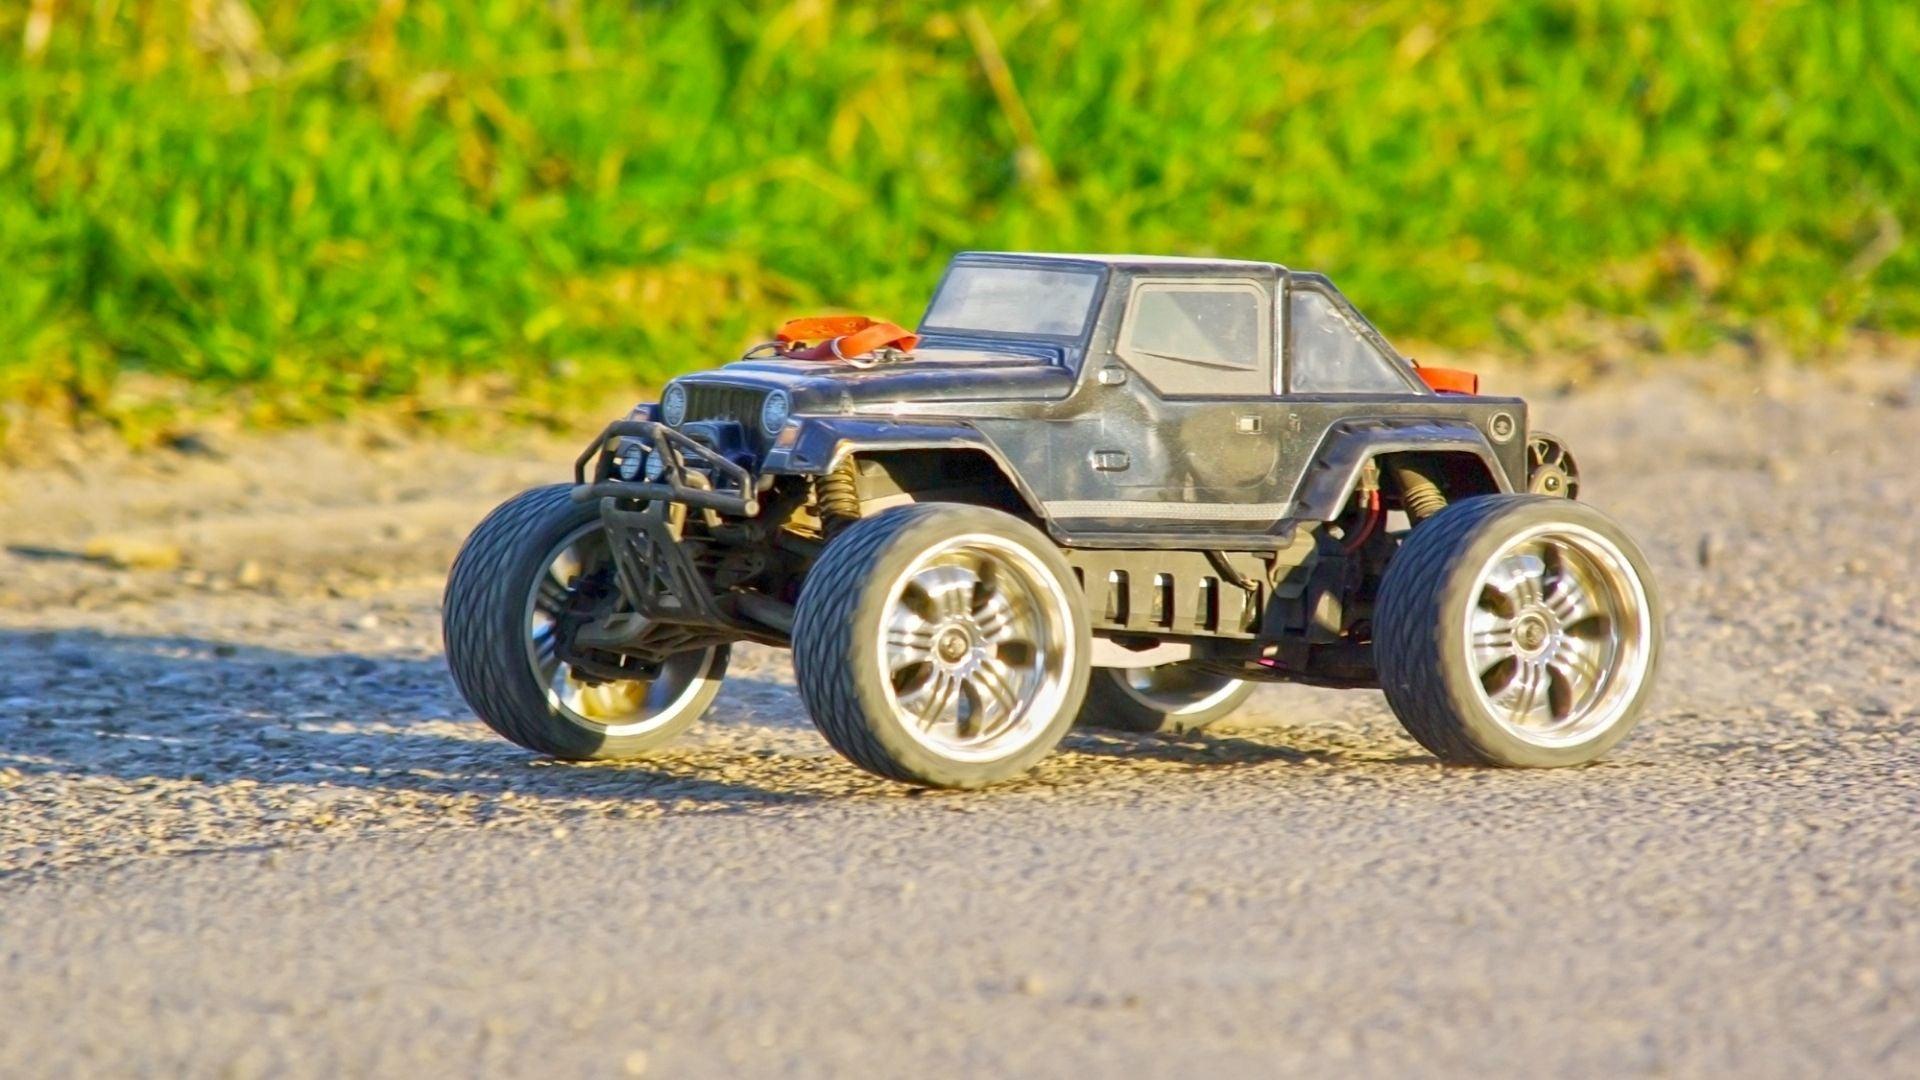 Rc Car 4X4 High Speed: Benefits of owning an RC car 4x4 high speed